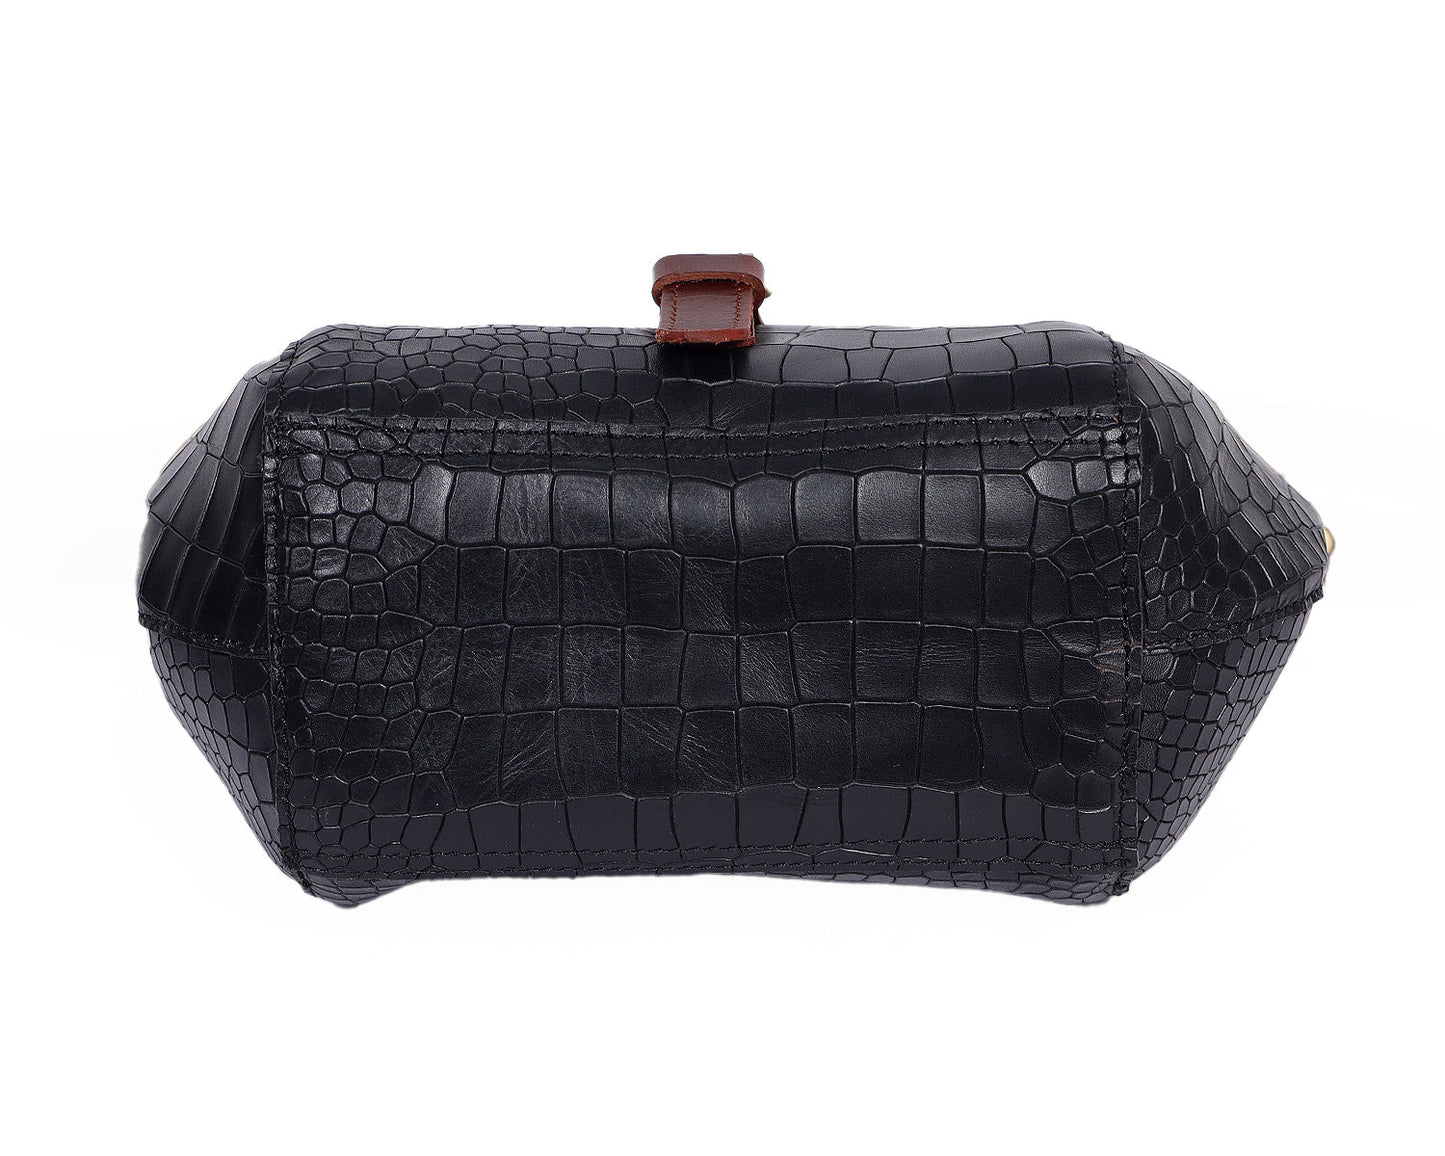 Elevate Your Style with Our Black Croro Leather Sling Bag. - CELTICINDIA